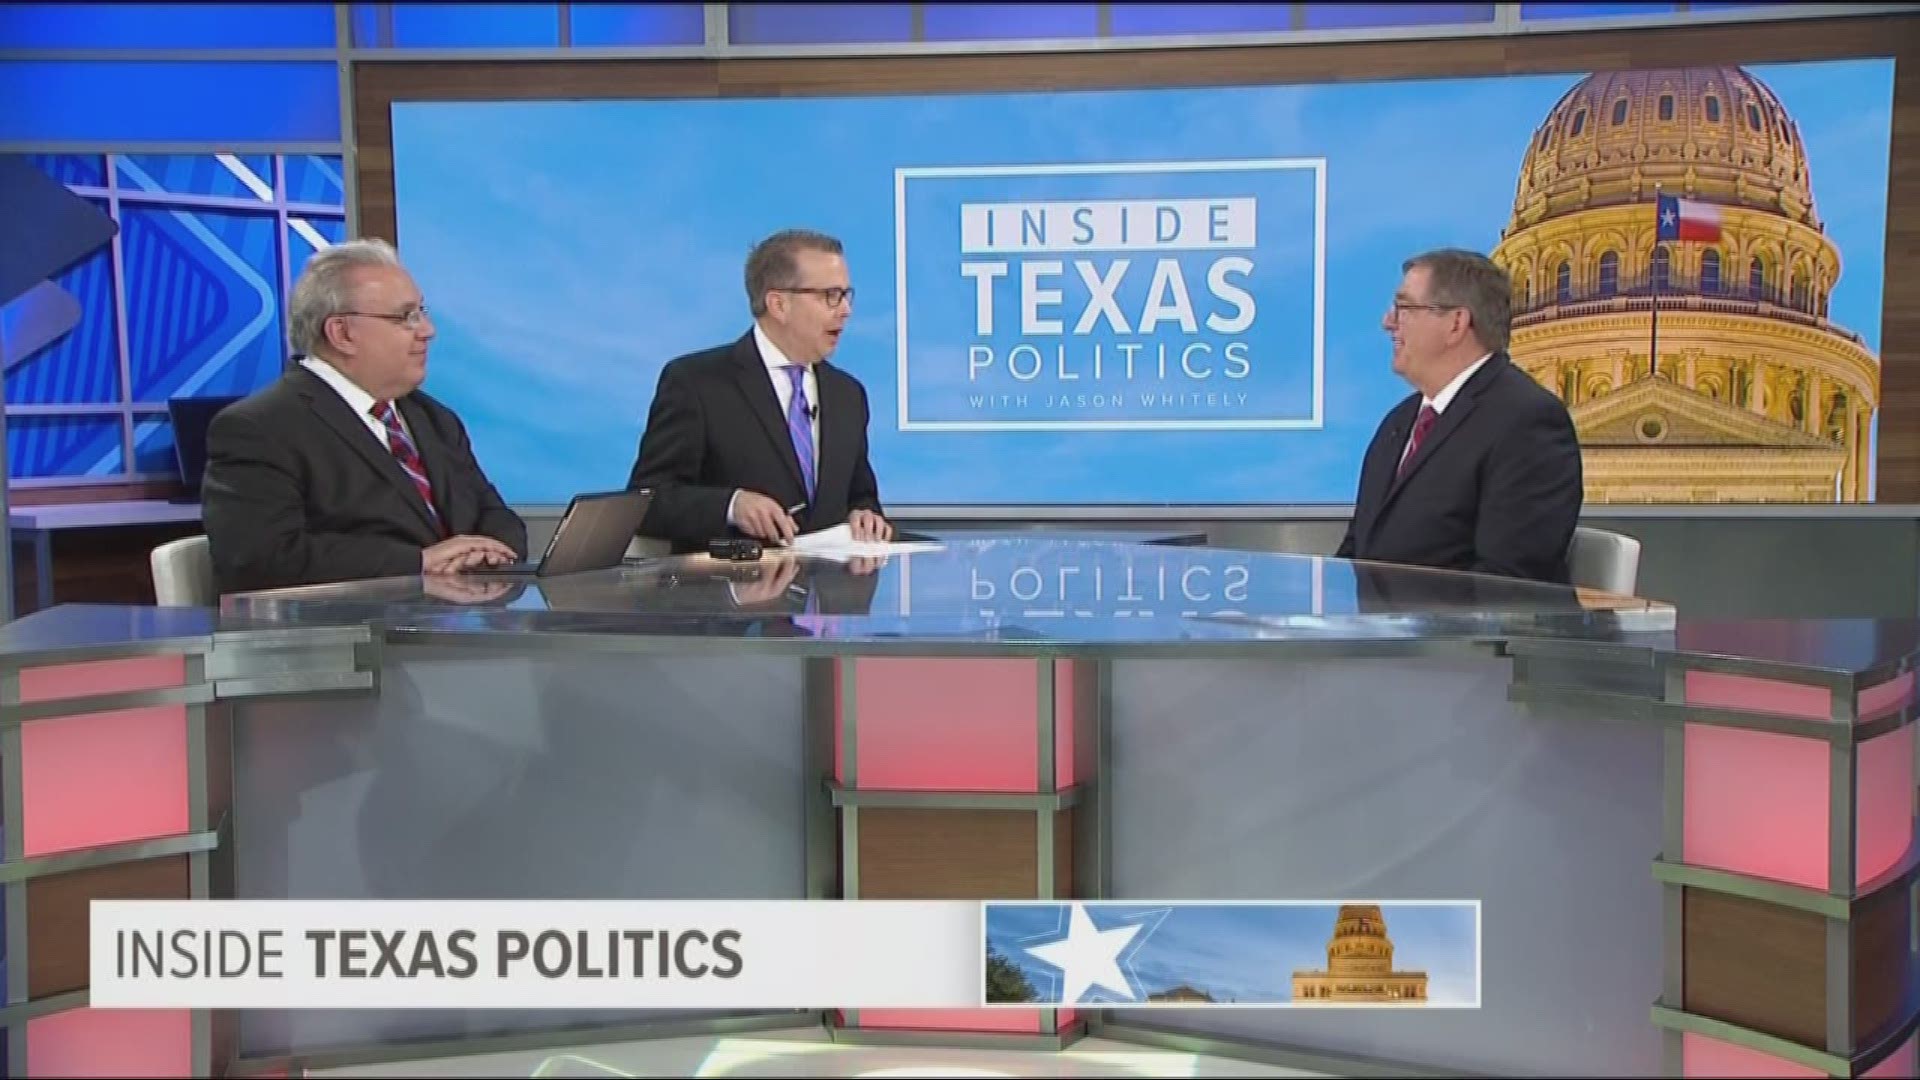 nside Texas Politics began with Republican U.S. Representative Michael Burgess (TX-16th District). Rep. Burgess talked about the Right To Try Act, a new federal law that allows patients to try drugs that the FDA has yet to approve. He also discussed wheth